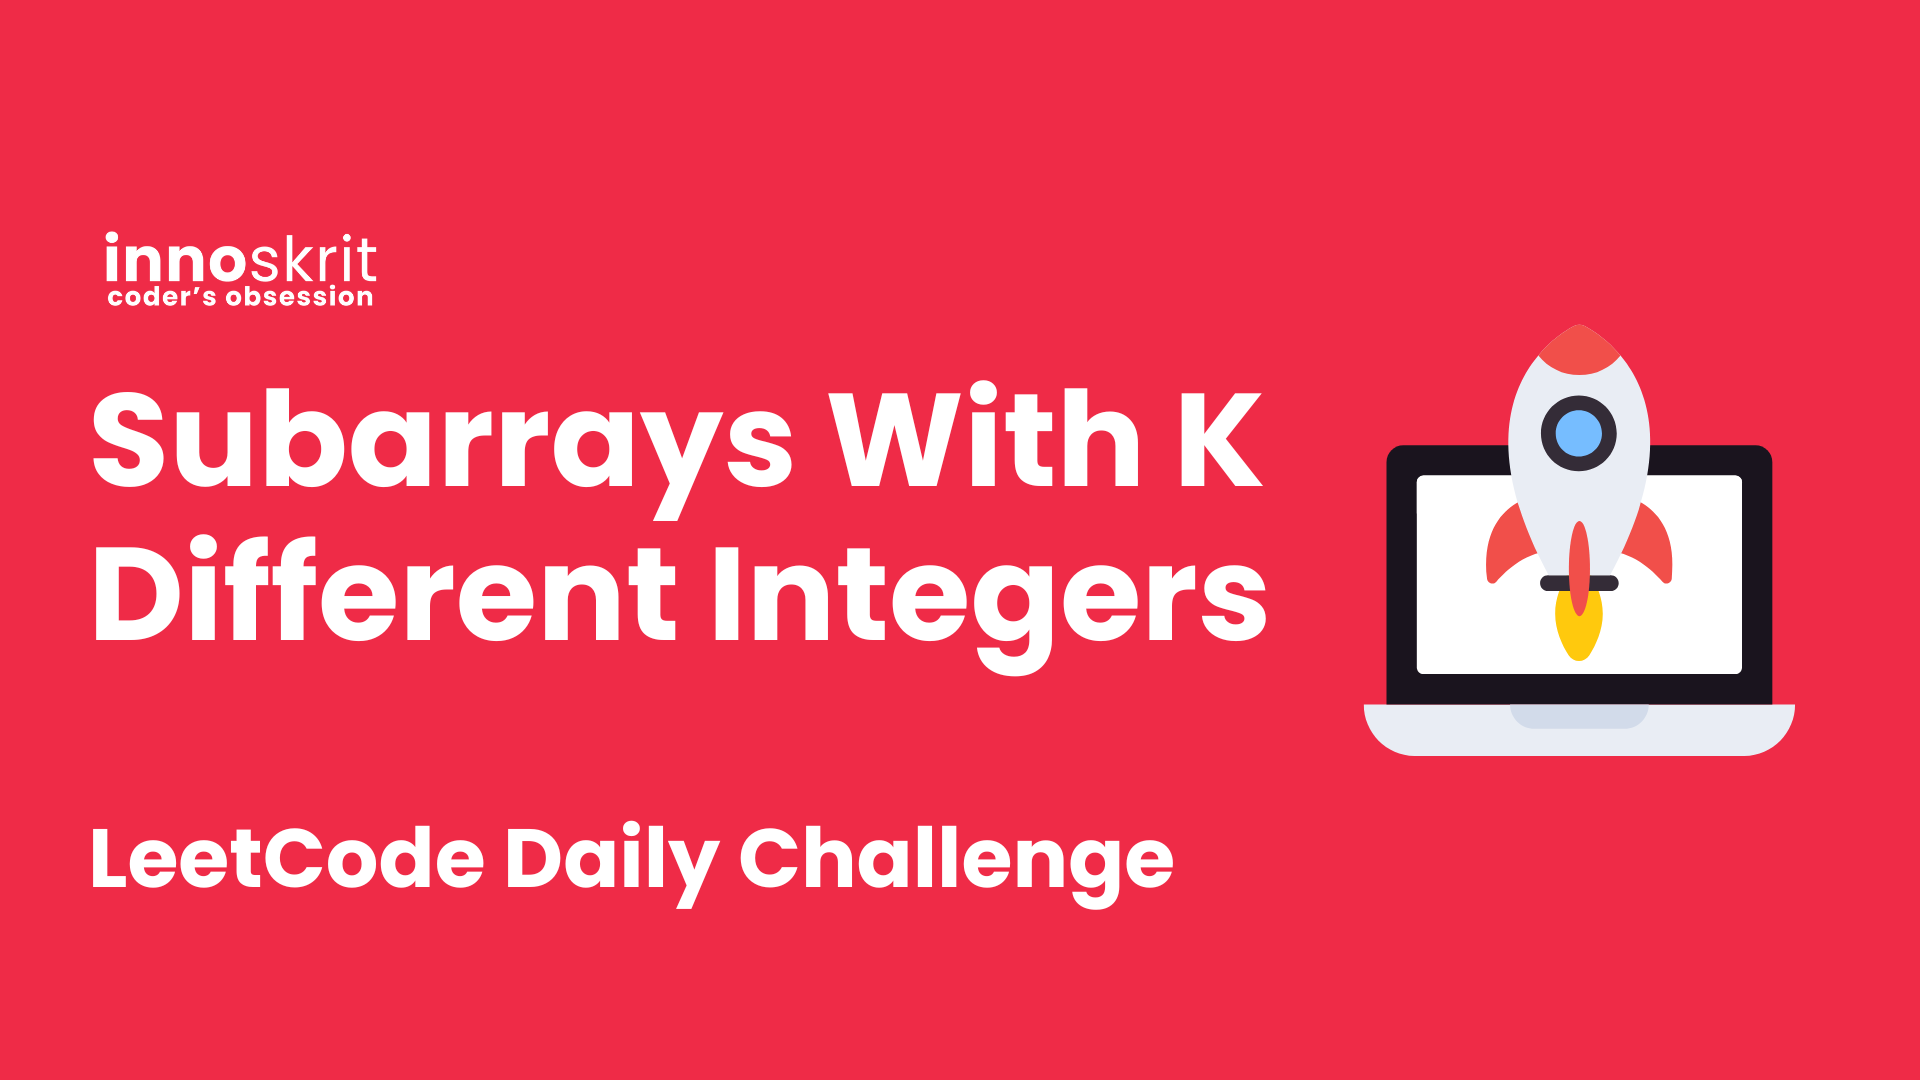 Subarrays With K Different Integers - LeetCode Daily Challenge